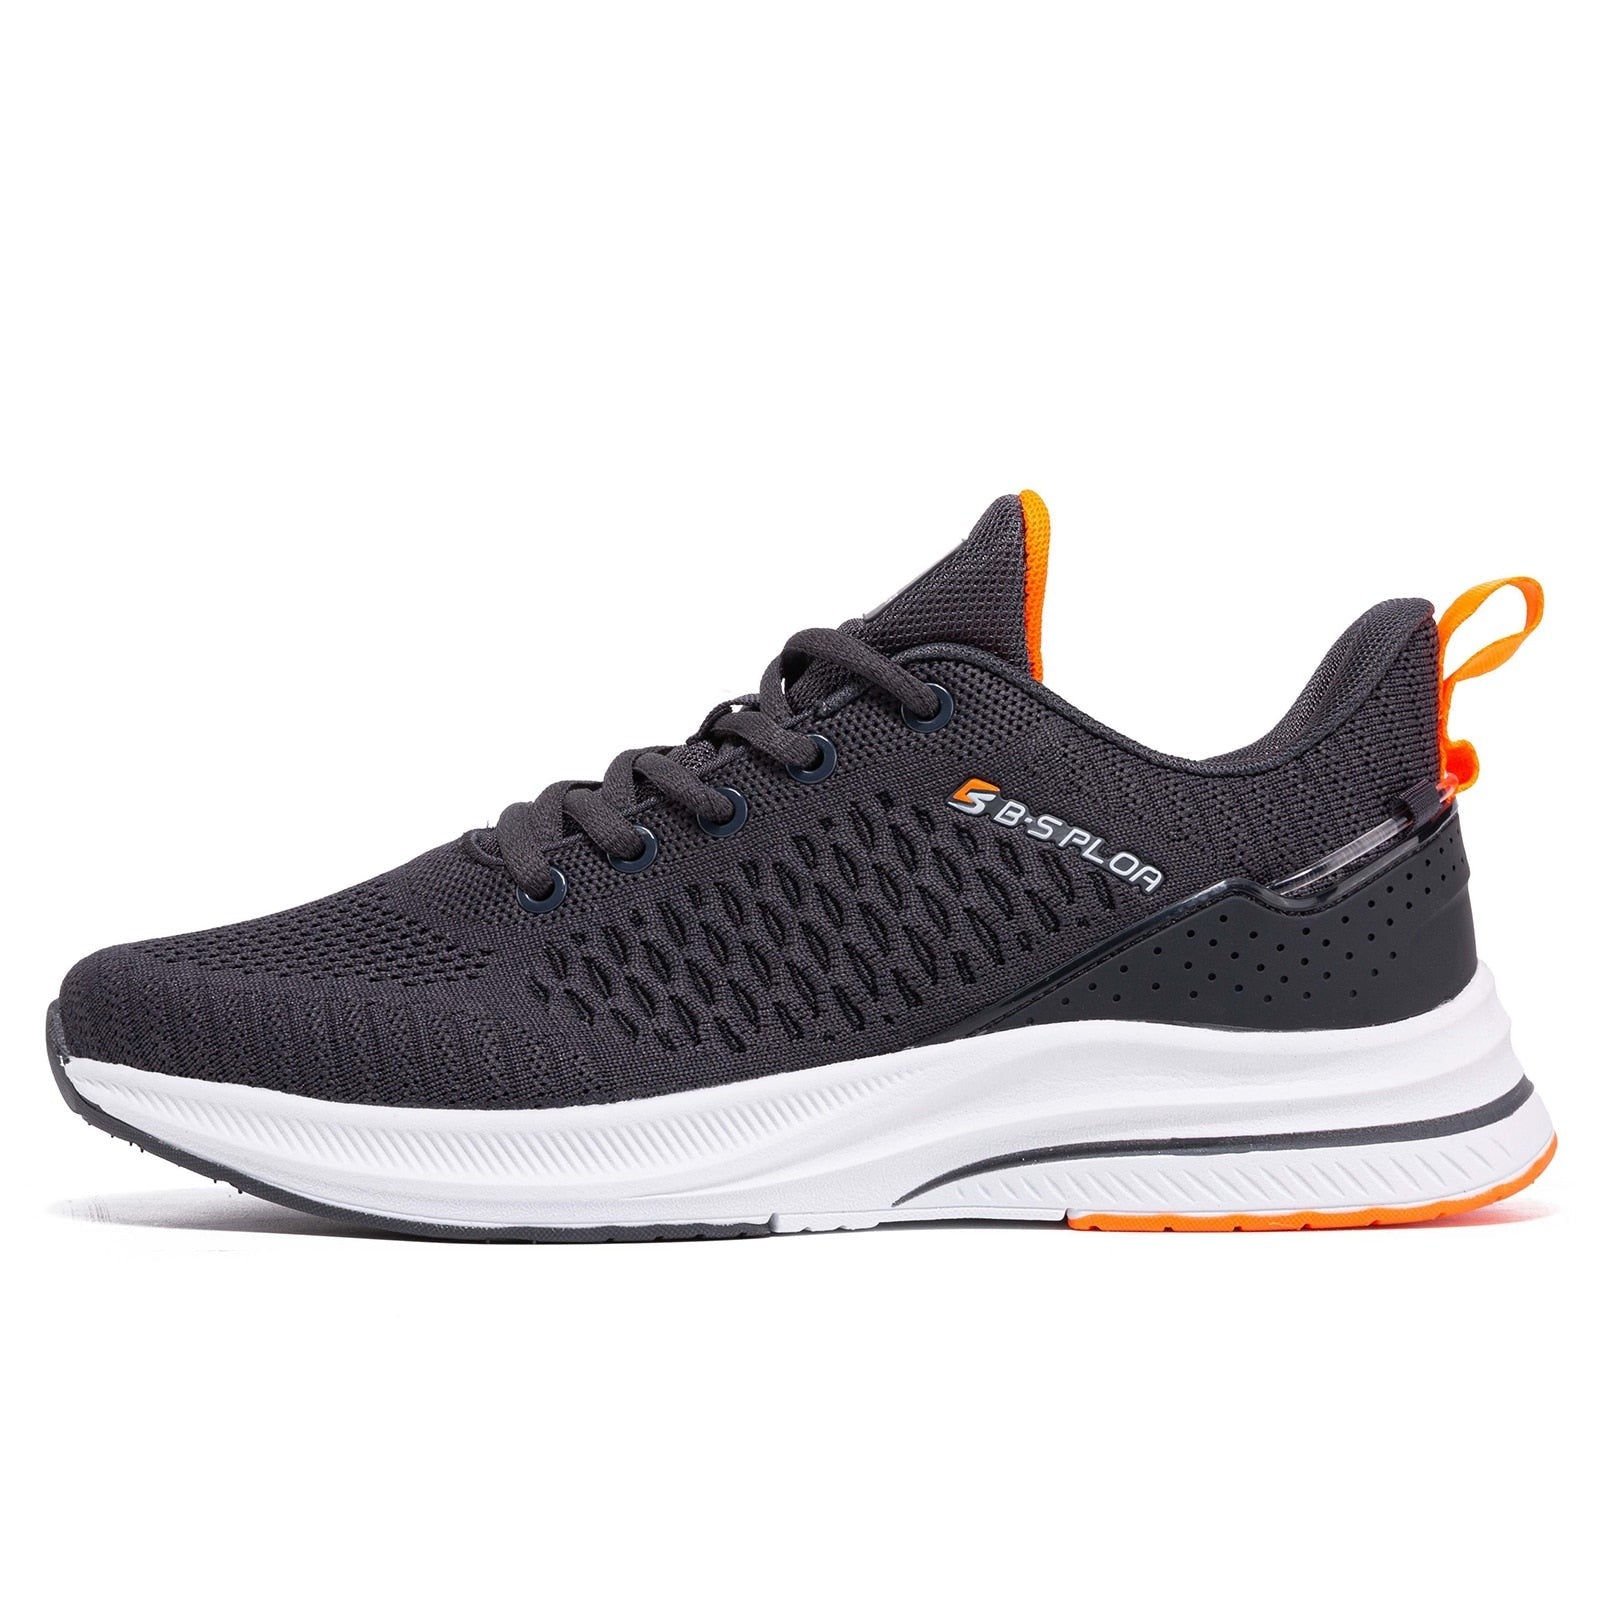 Baasploa Lightweight Mesh Running Shoes for Men with response cushion technology